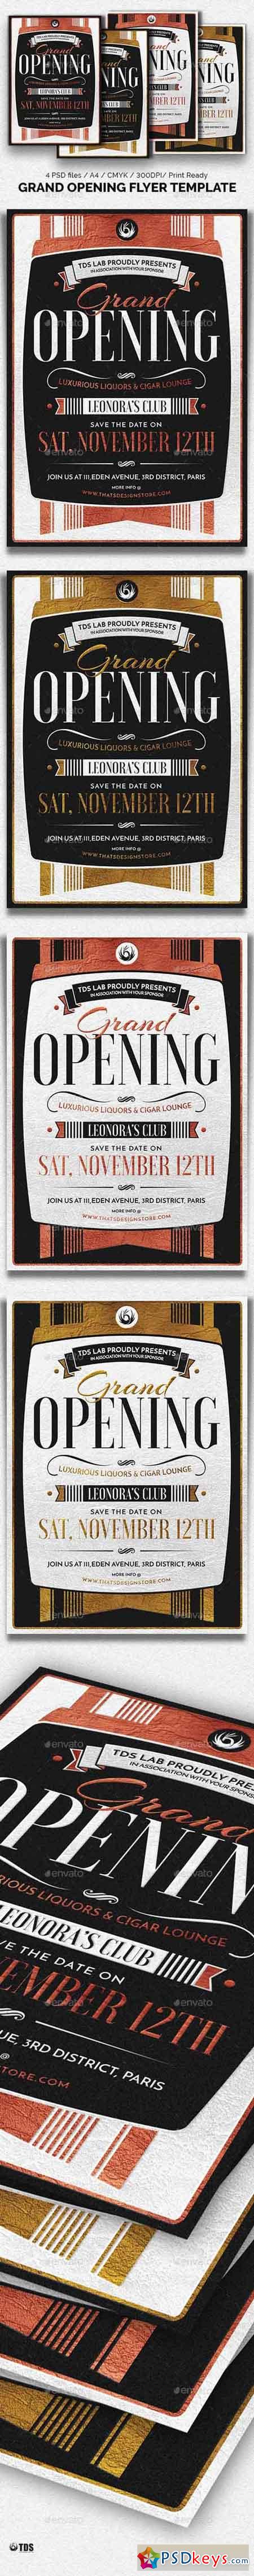 Grand Opening Flyer Template 20145664